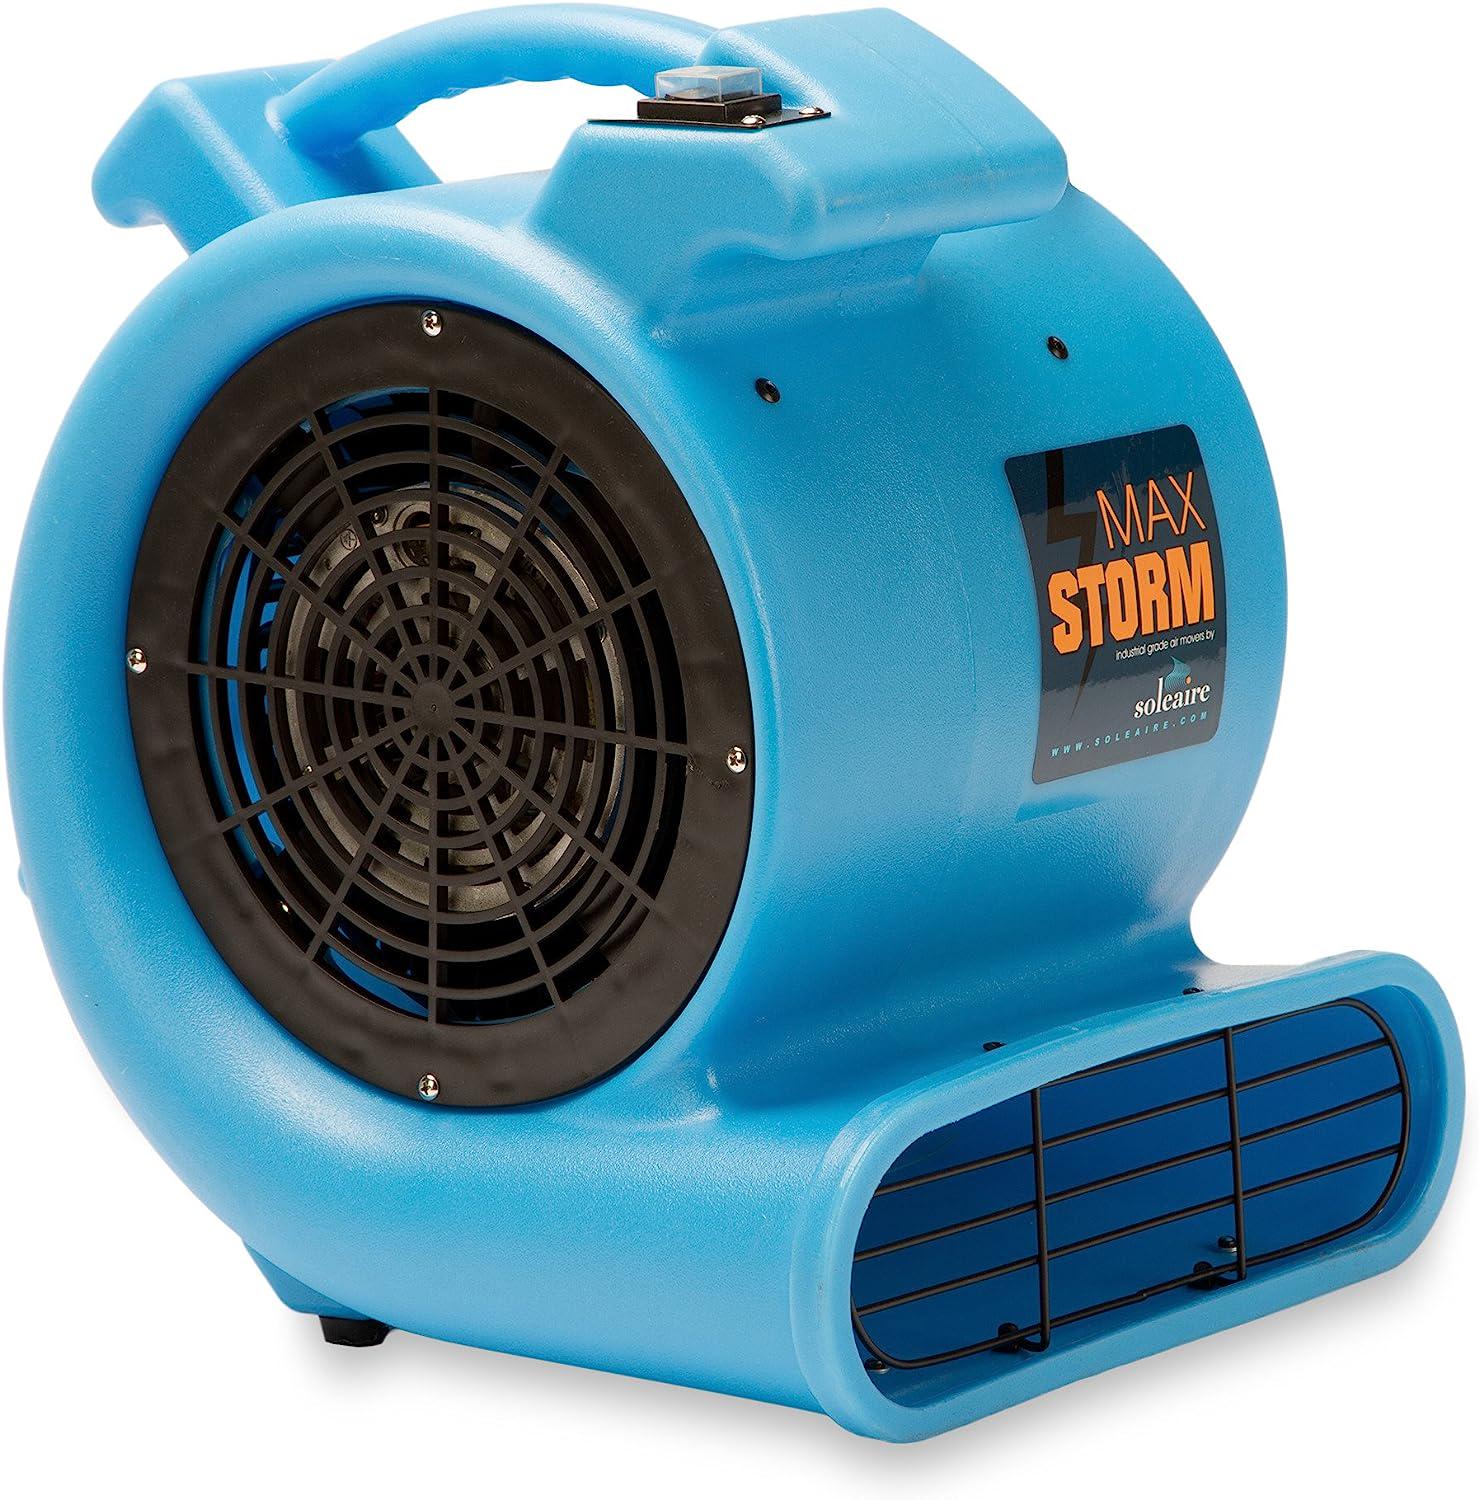 Max Storm 1/2 HP Durable Lightweight Air Mover Carpet Dryer Blower Floor Fan for Pro Janitorial Cleaner, Blue, 1 Pack-